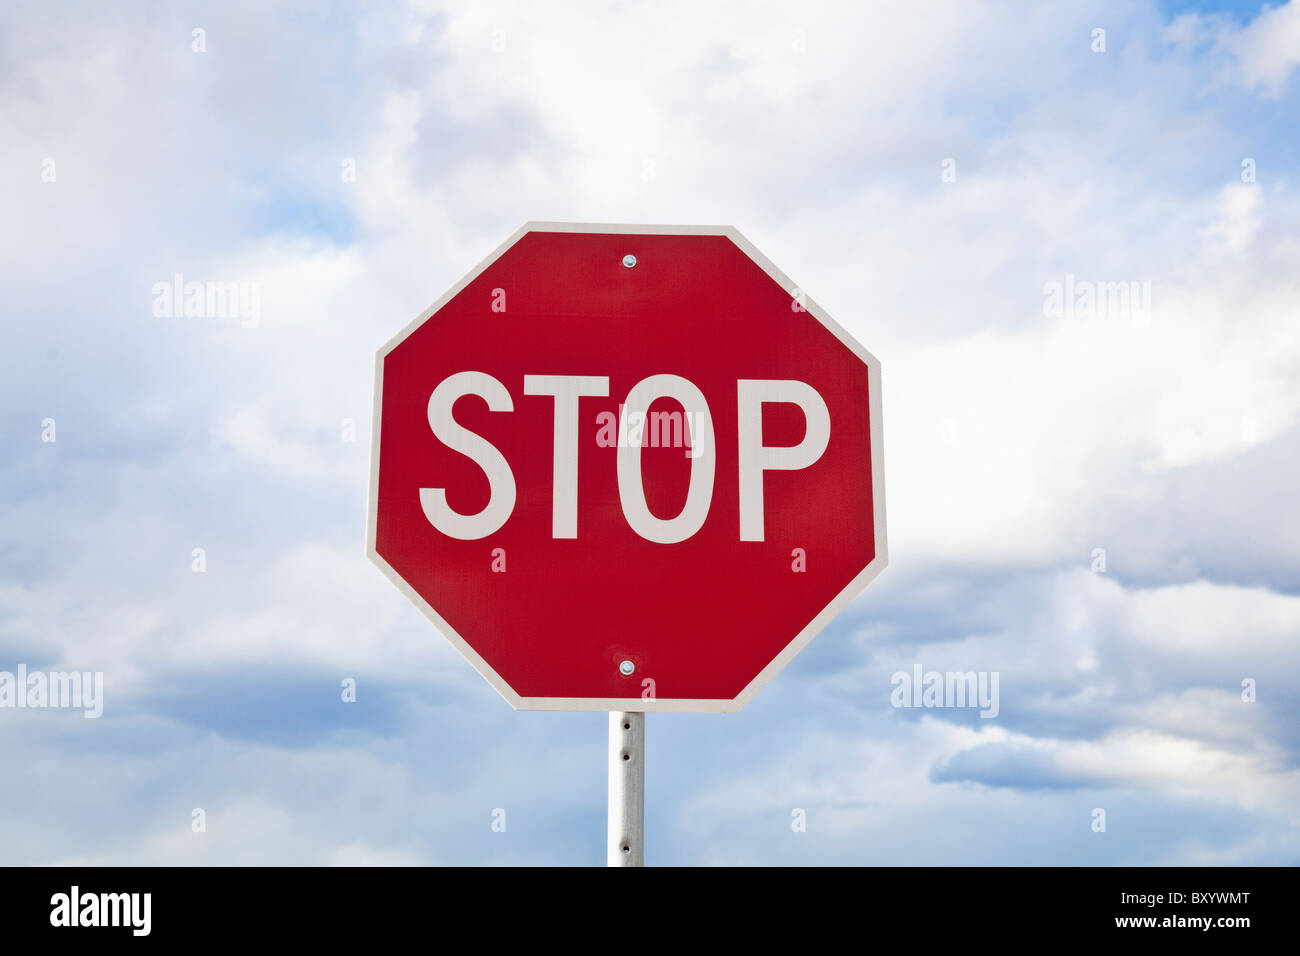 Stop sign against sky Stock Photo